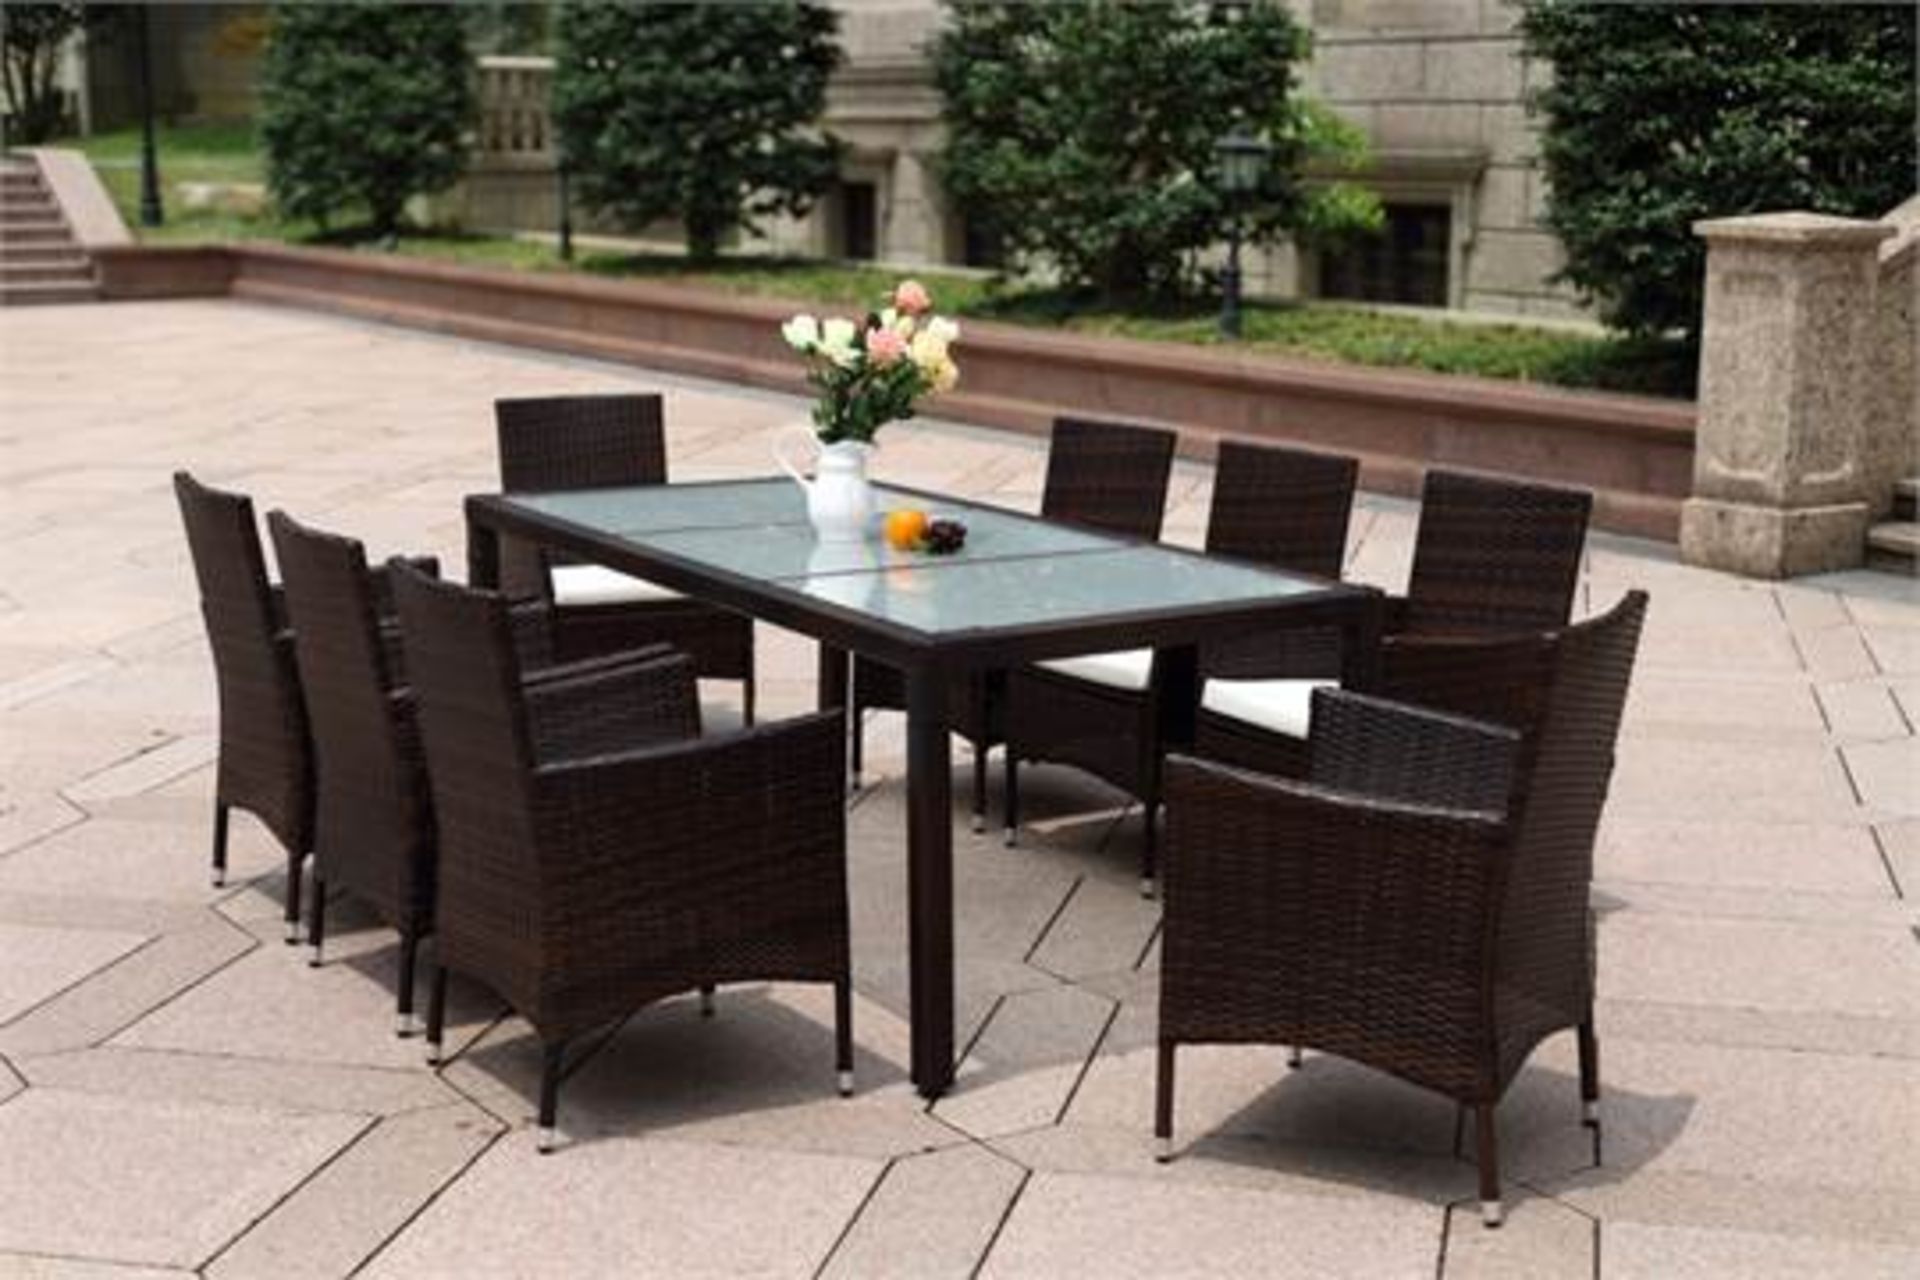 (9207) BRAND NEW BOXED LUXURIOUS 9 PIECE RATTAN GARDEN/CONSERVATORY FURNITURE SET. TO INCLUDE A